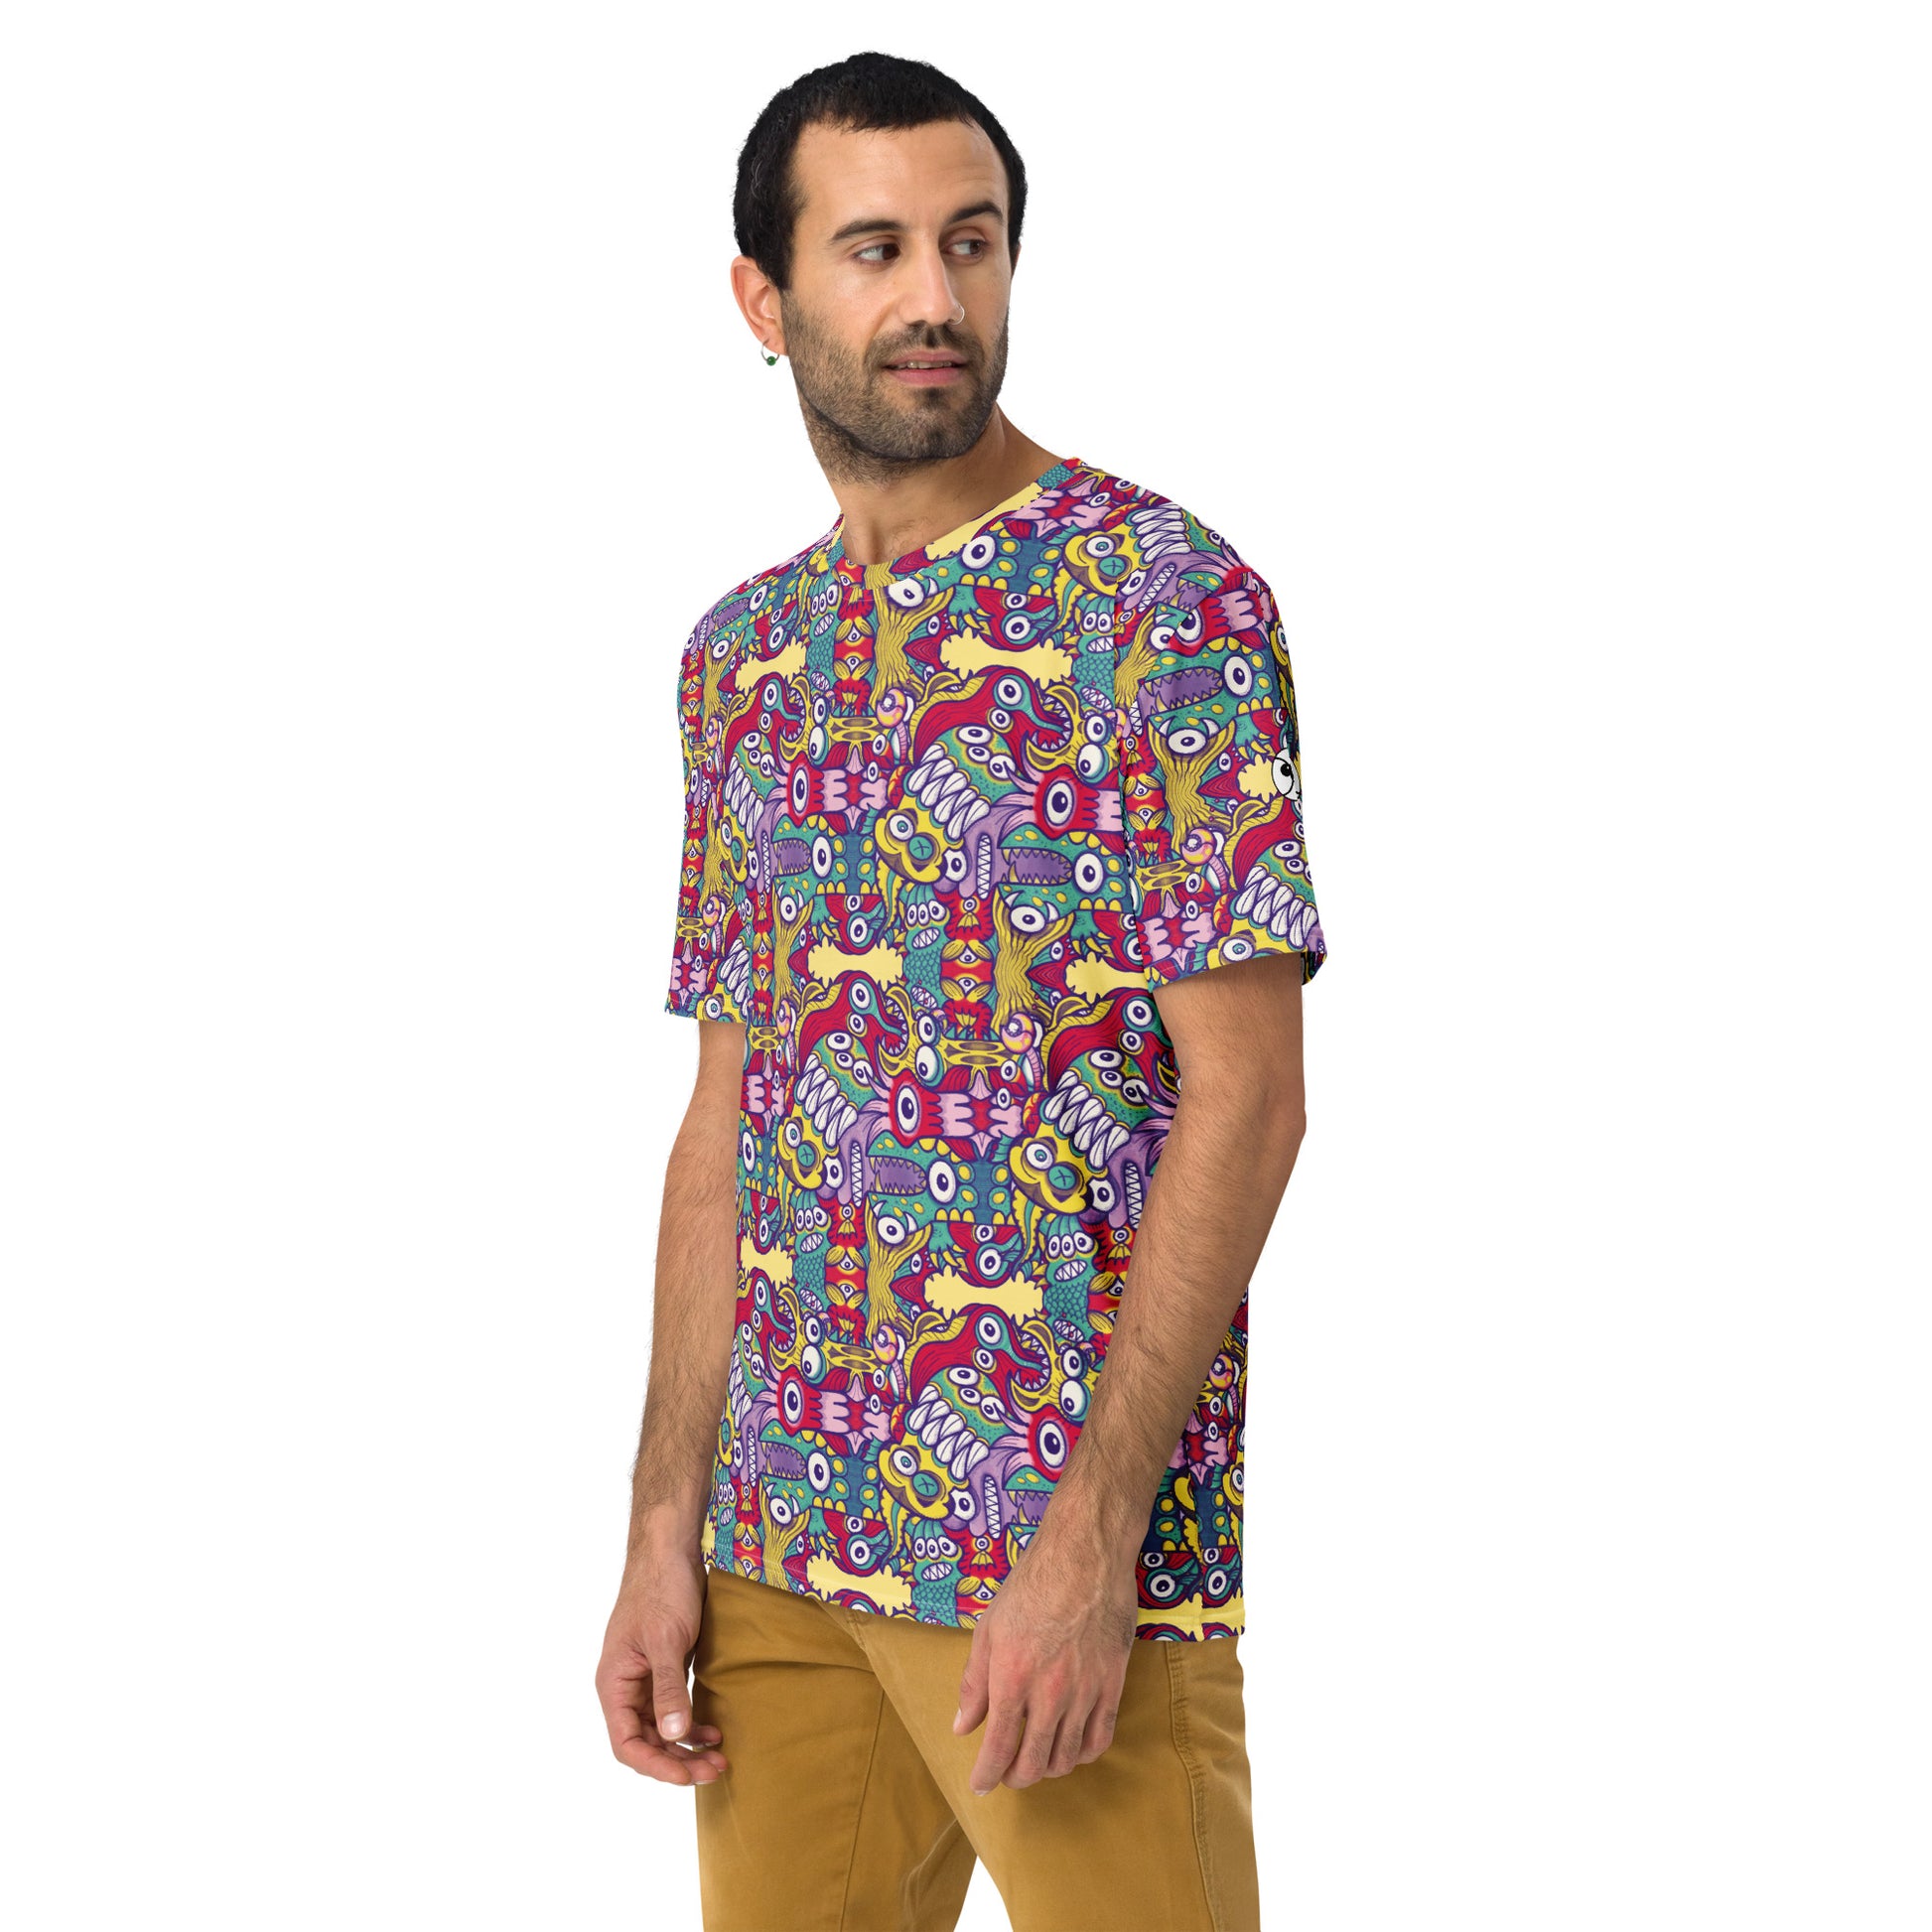 Exquisite corpse of doodles in a pattern design Men's t-shirt. Side view